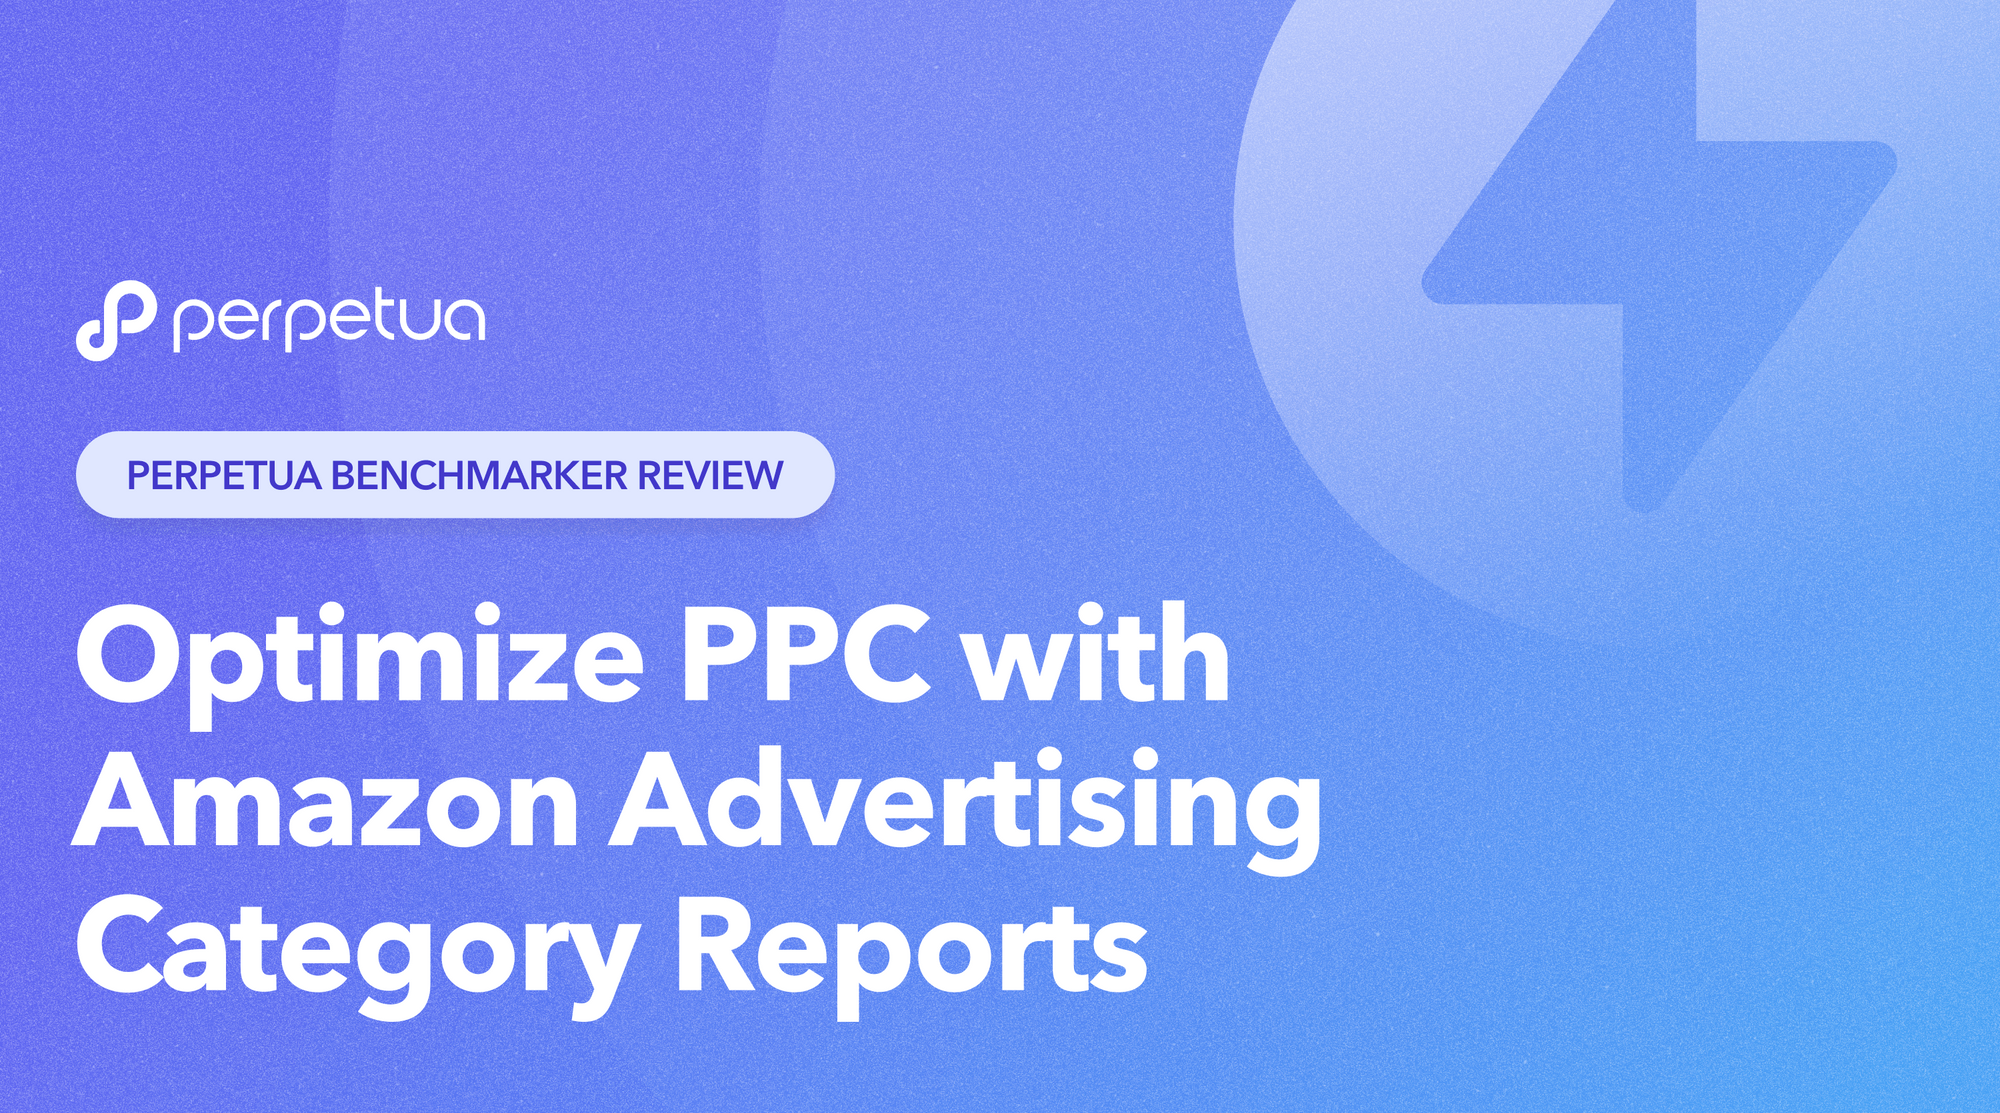 Perpetua Benchmarker Review: How to Optimize PPC with Amazon Advertising Benchmark Reports by Category